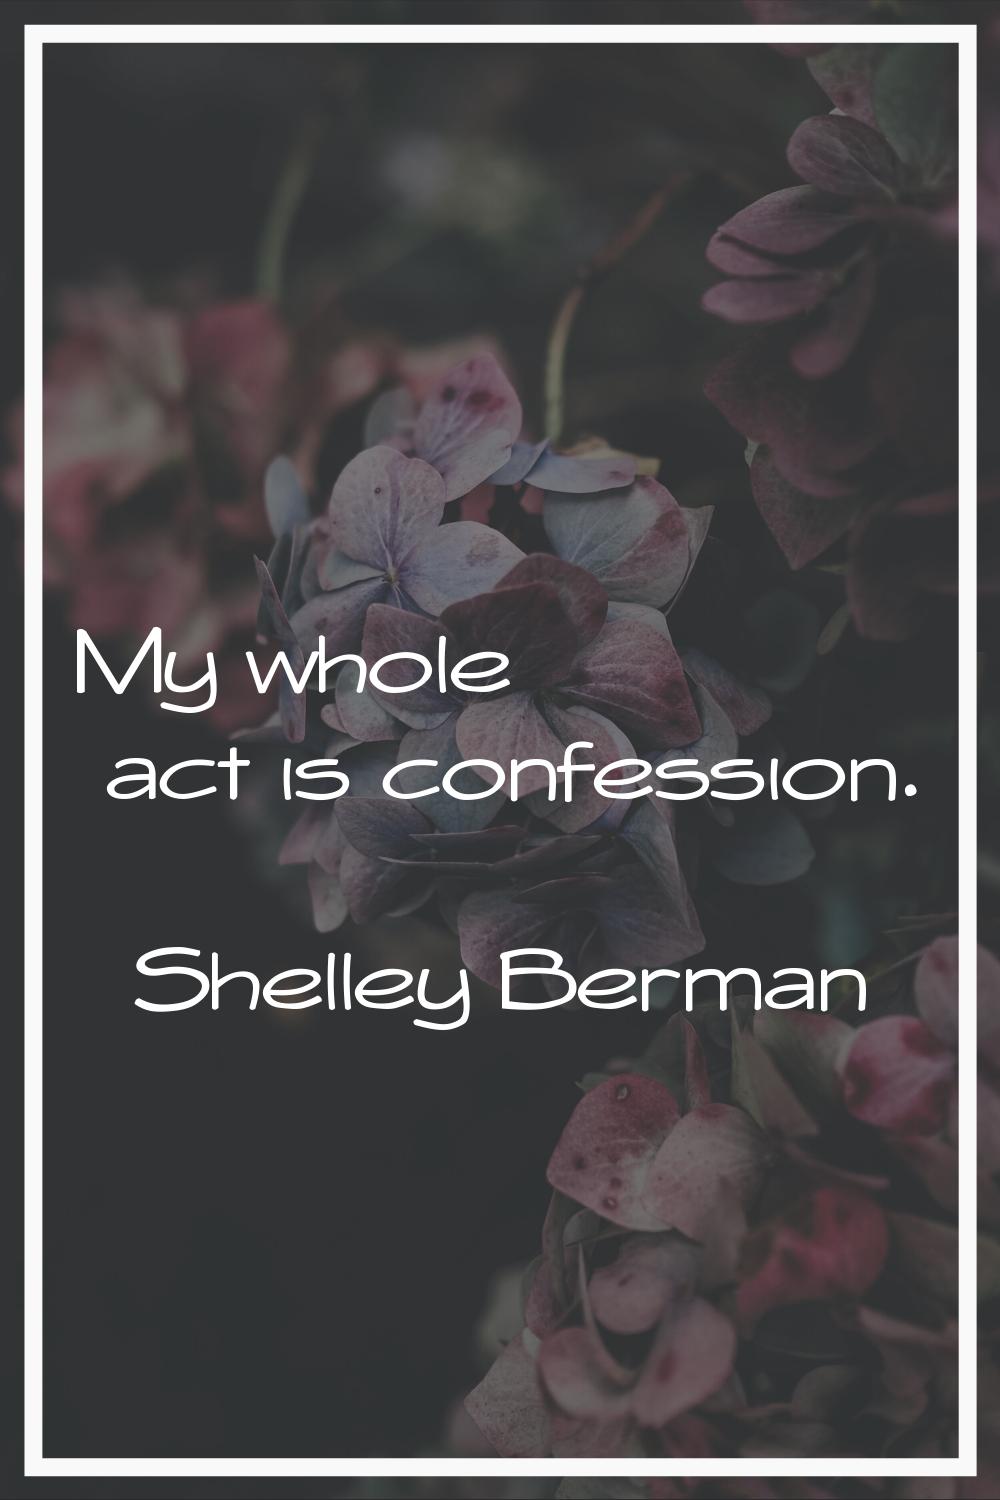 My whole act is confession.